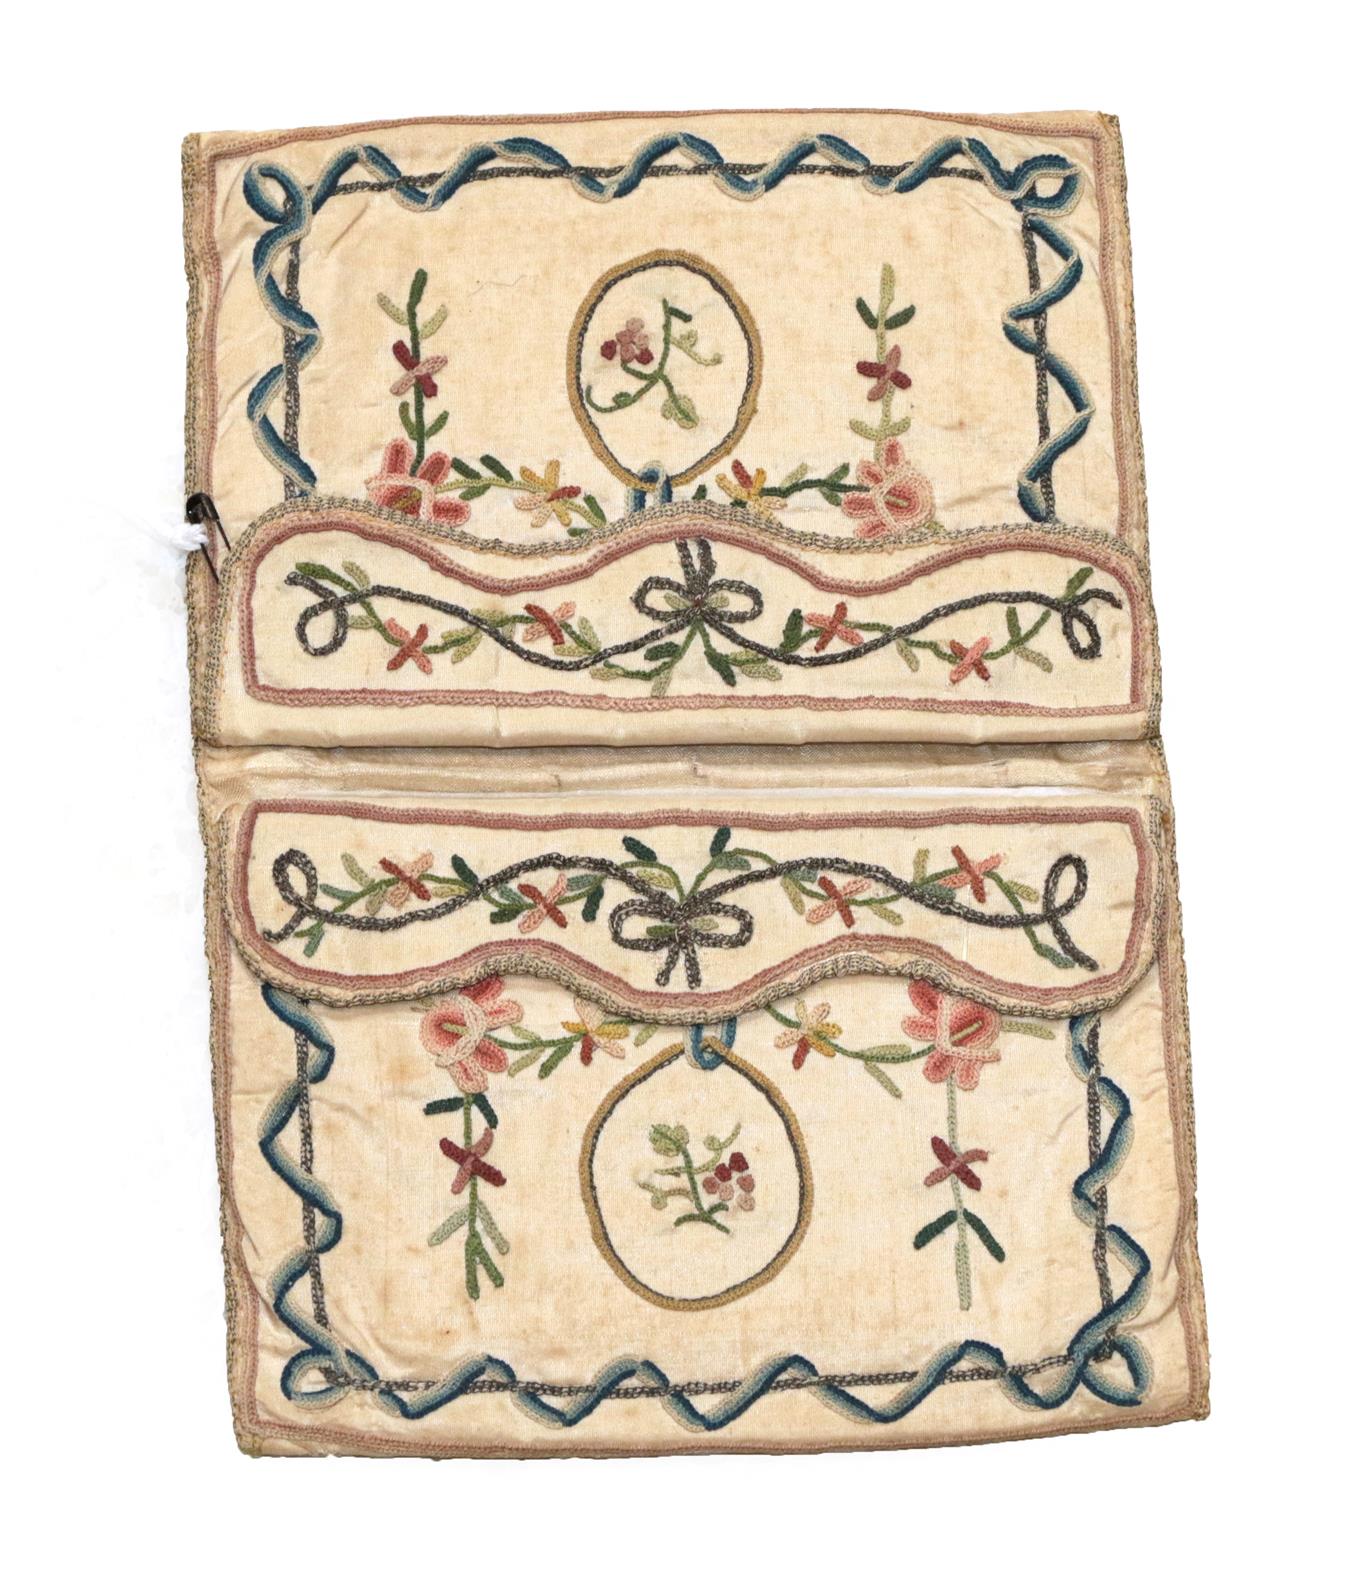 18th Century Cream Silk Wallet/Pocket Book, embroidered with floral sprigs within a rectangular